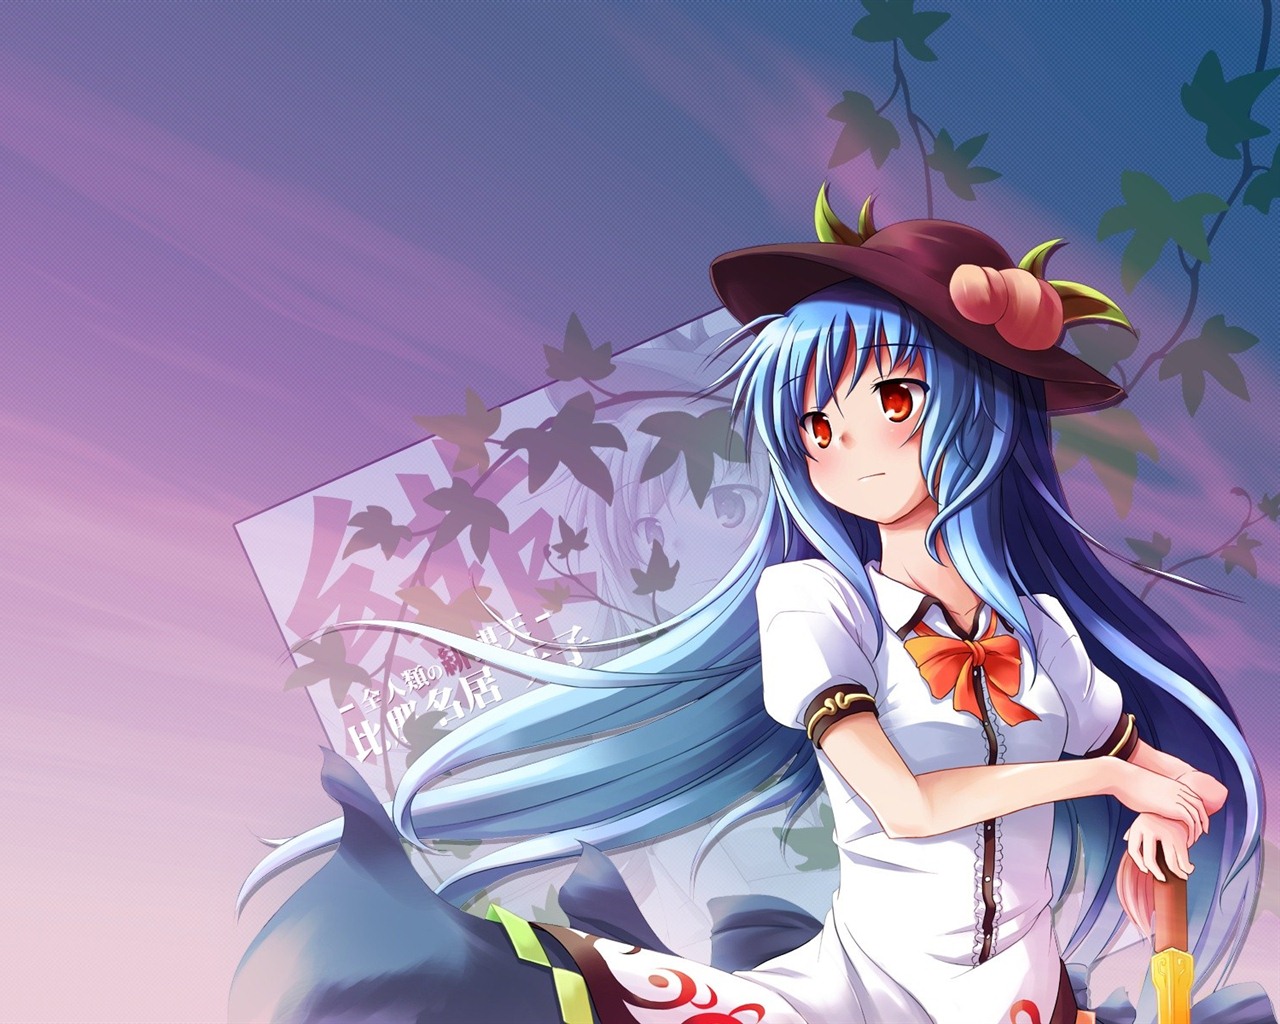 Touhou Project caricature HD wallpapers #16 - 1280x1024